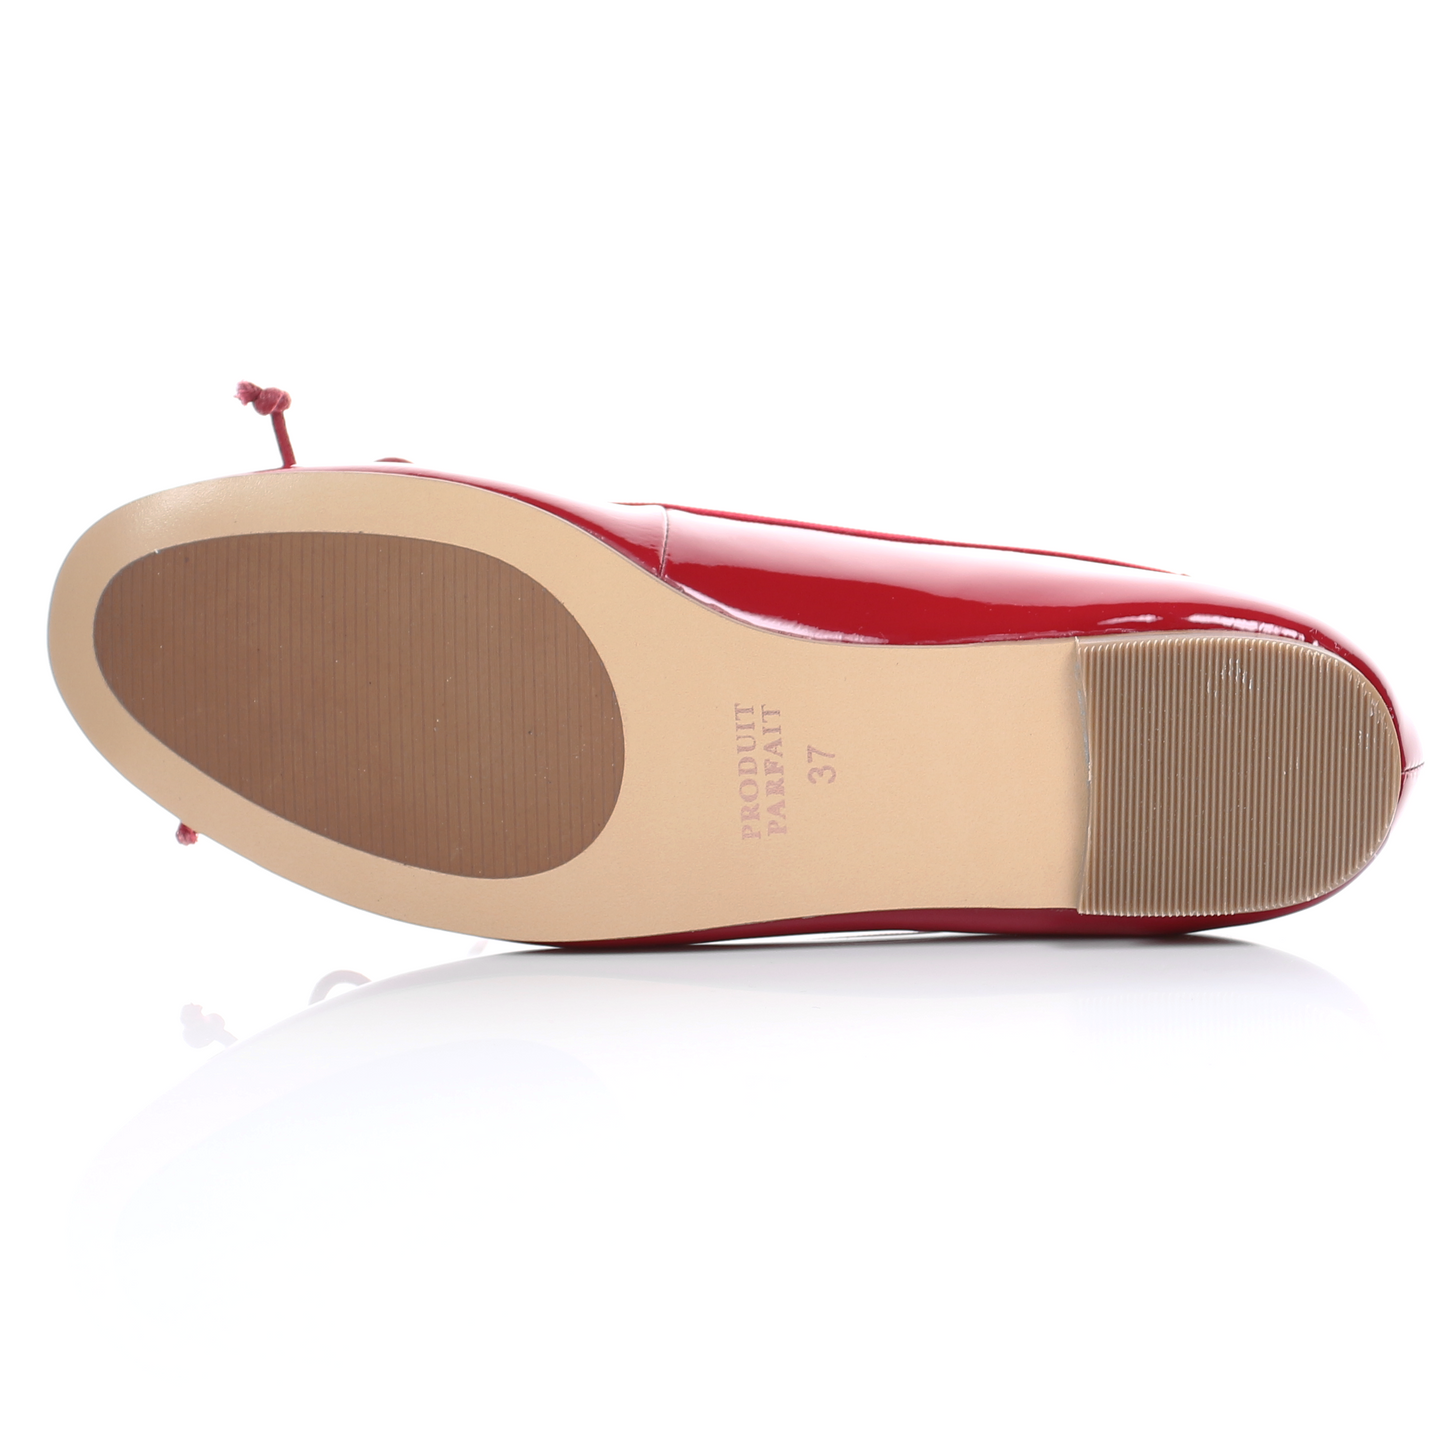 Patent Sheep Leather Ballerina (Red)